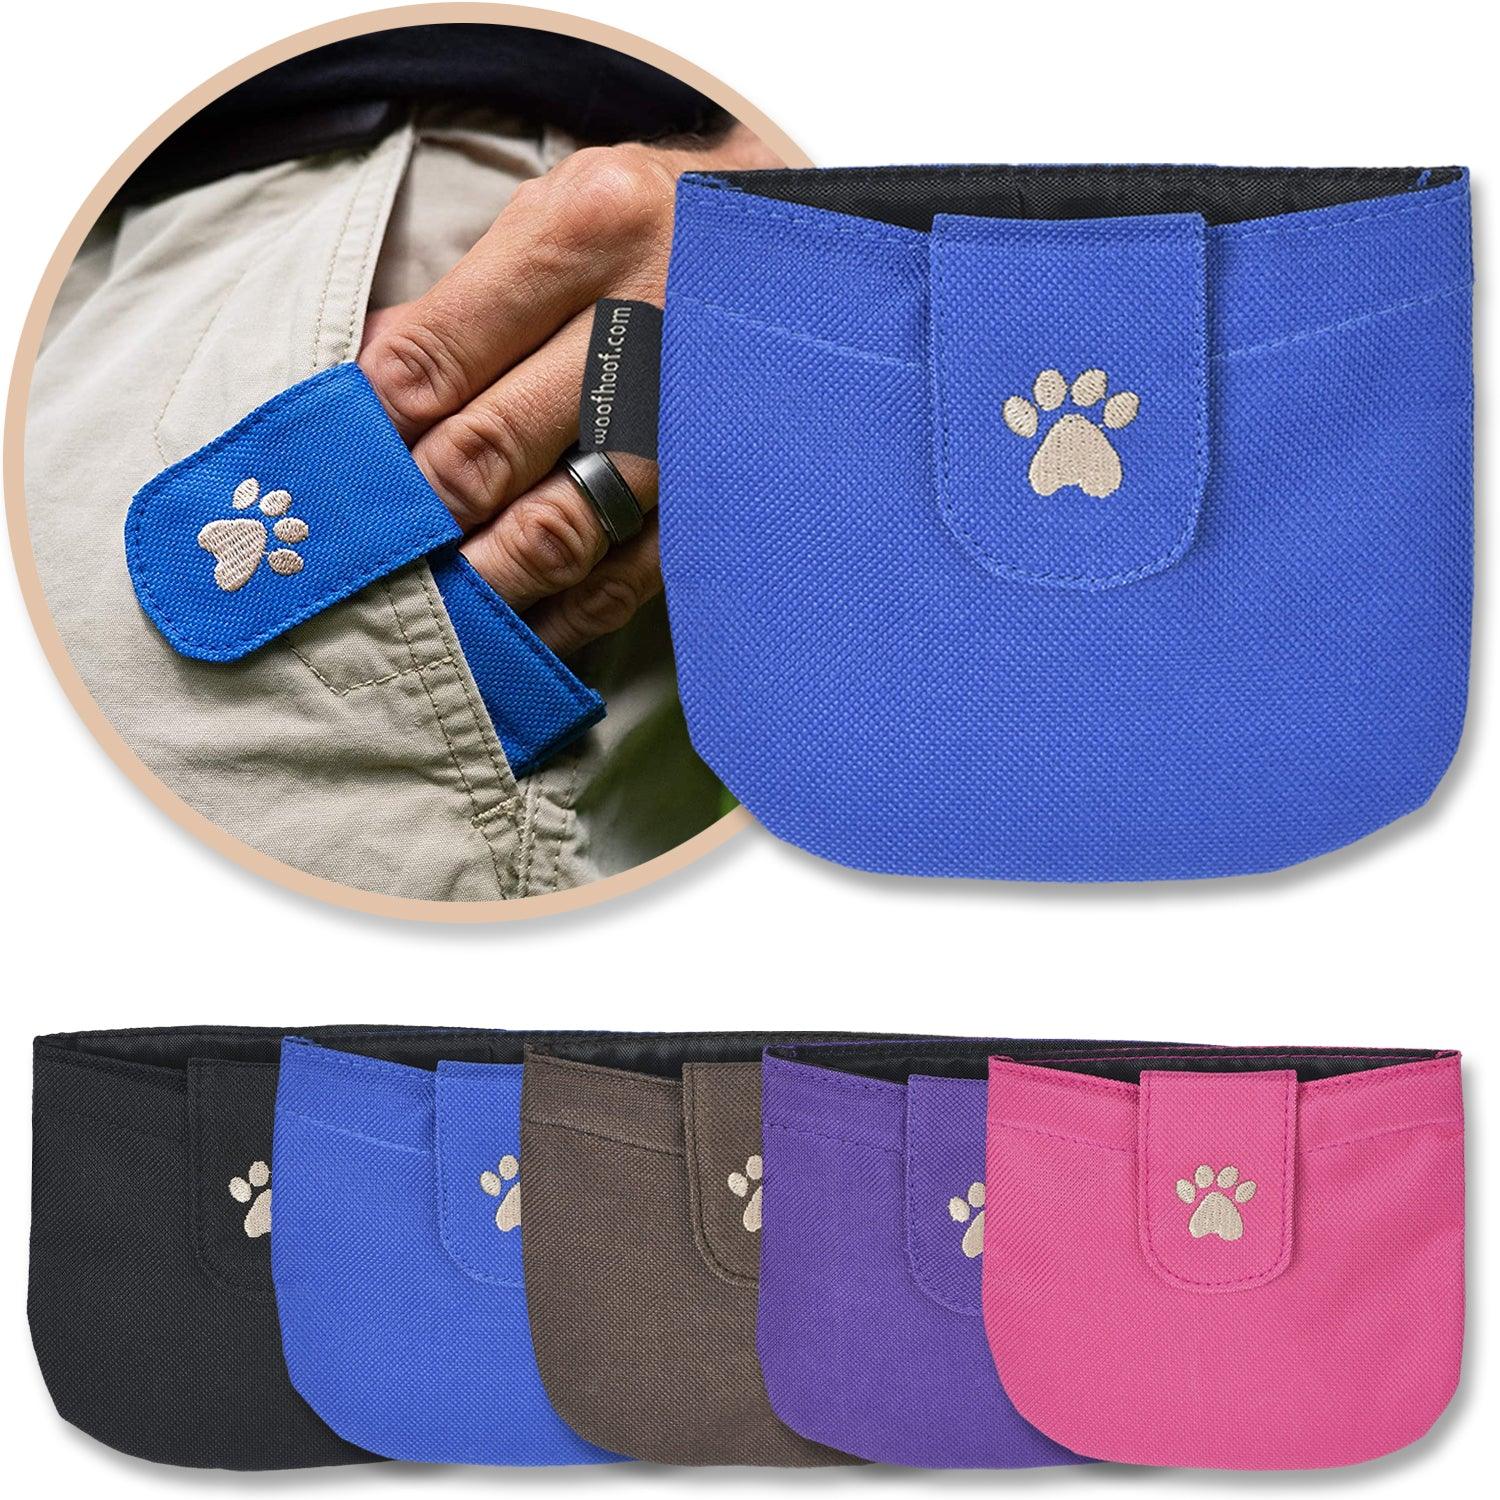 Blue pocket treat pouch shown with a variety of five colors